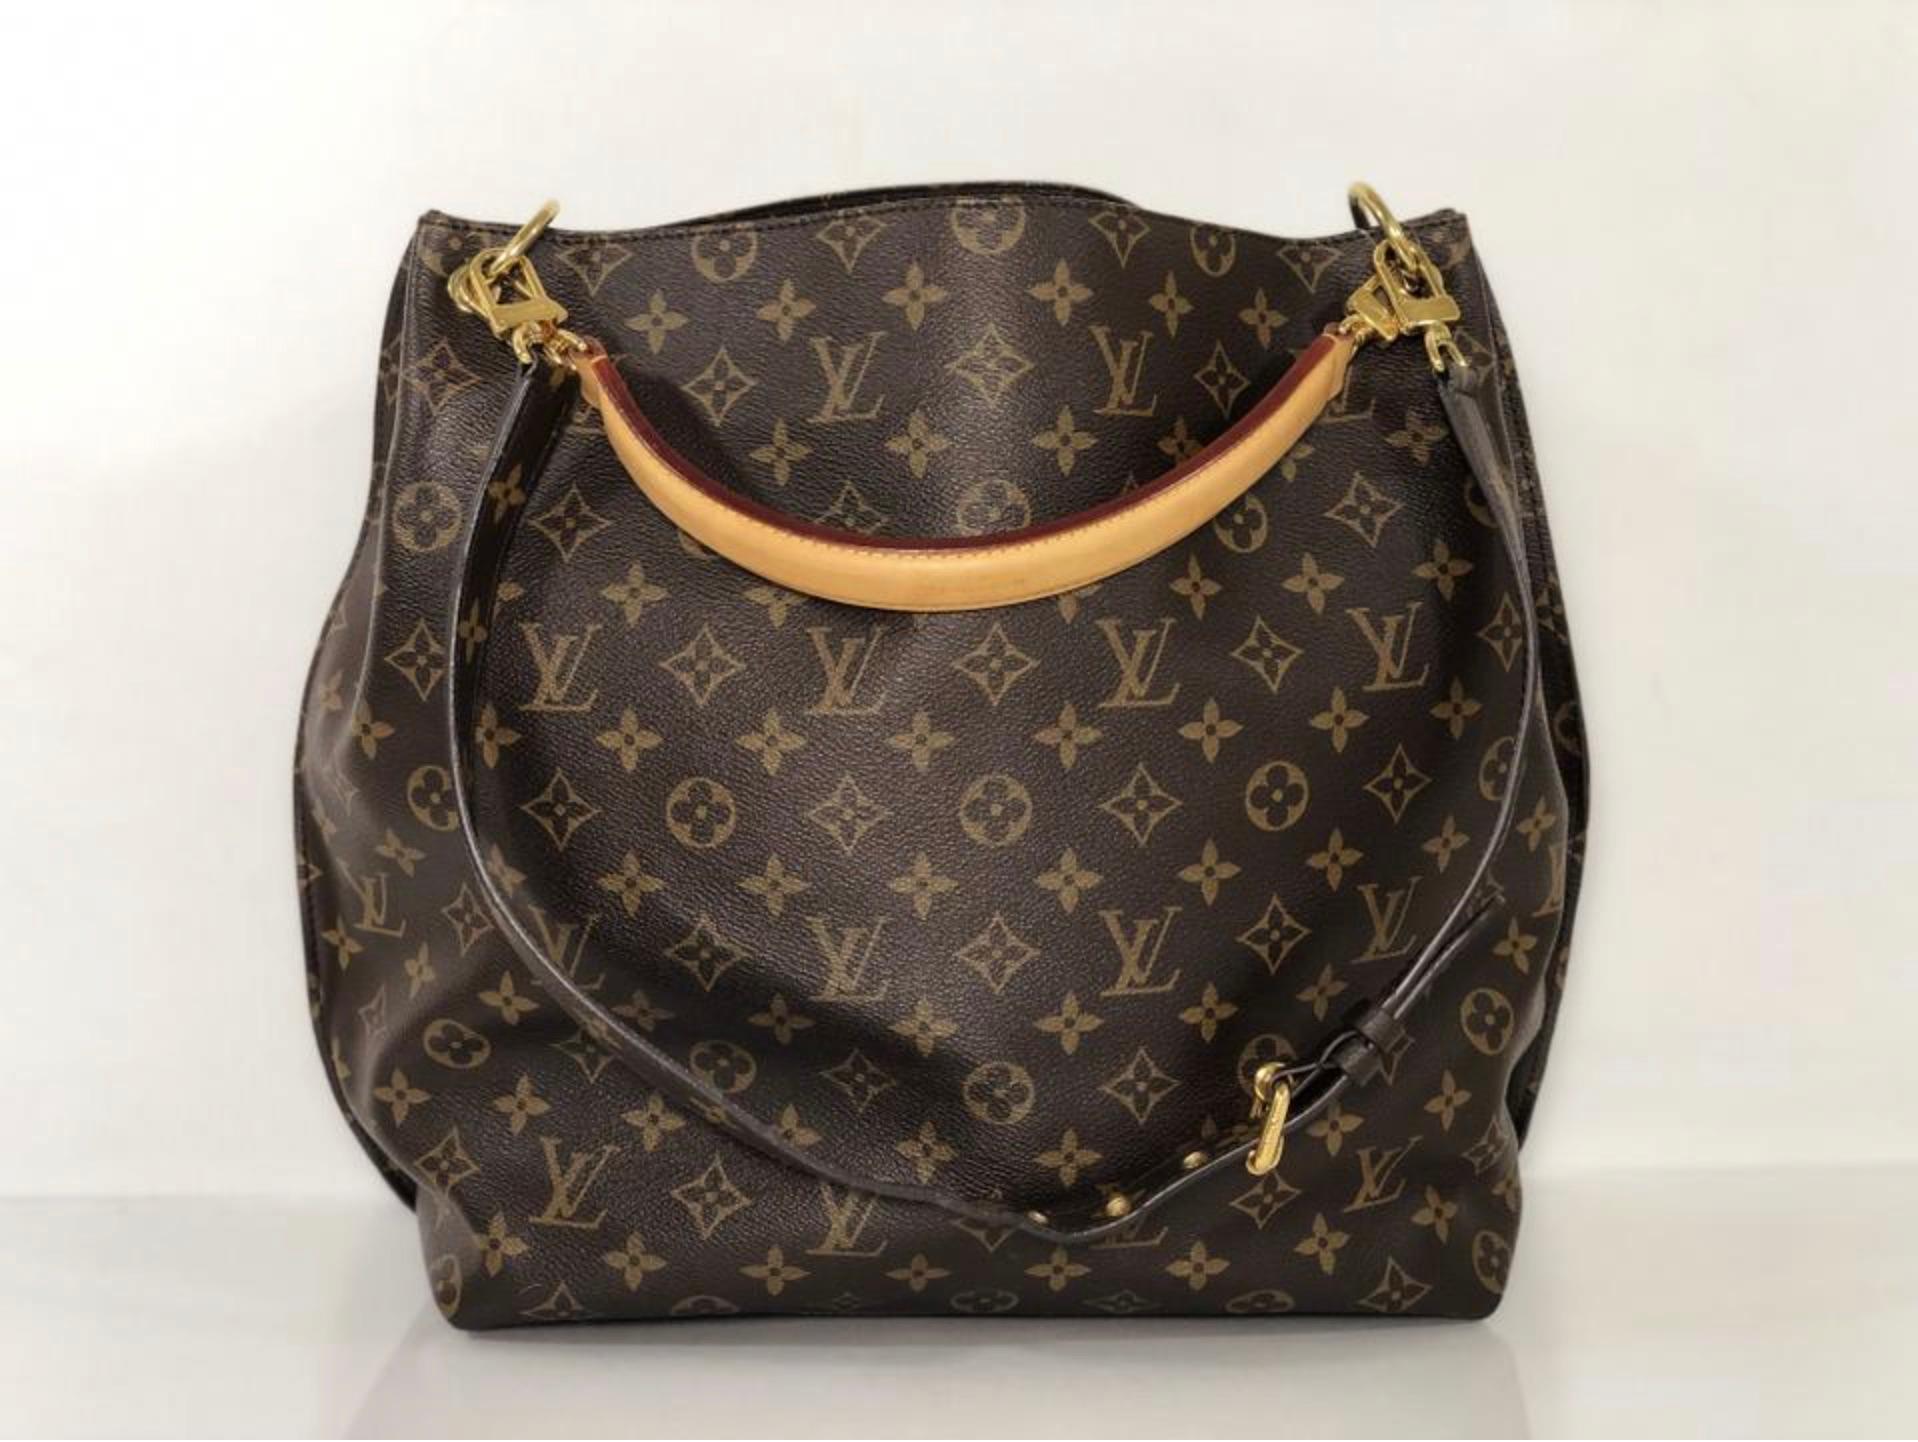  Louis Vuitton Monogram Metis Hobo Two Way Shoulder Handbag In Good Condition For Sale In Saint Charles, IL